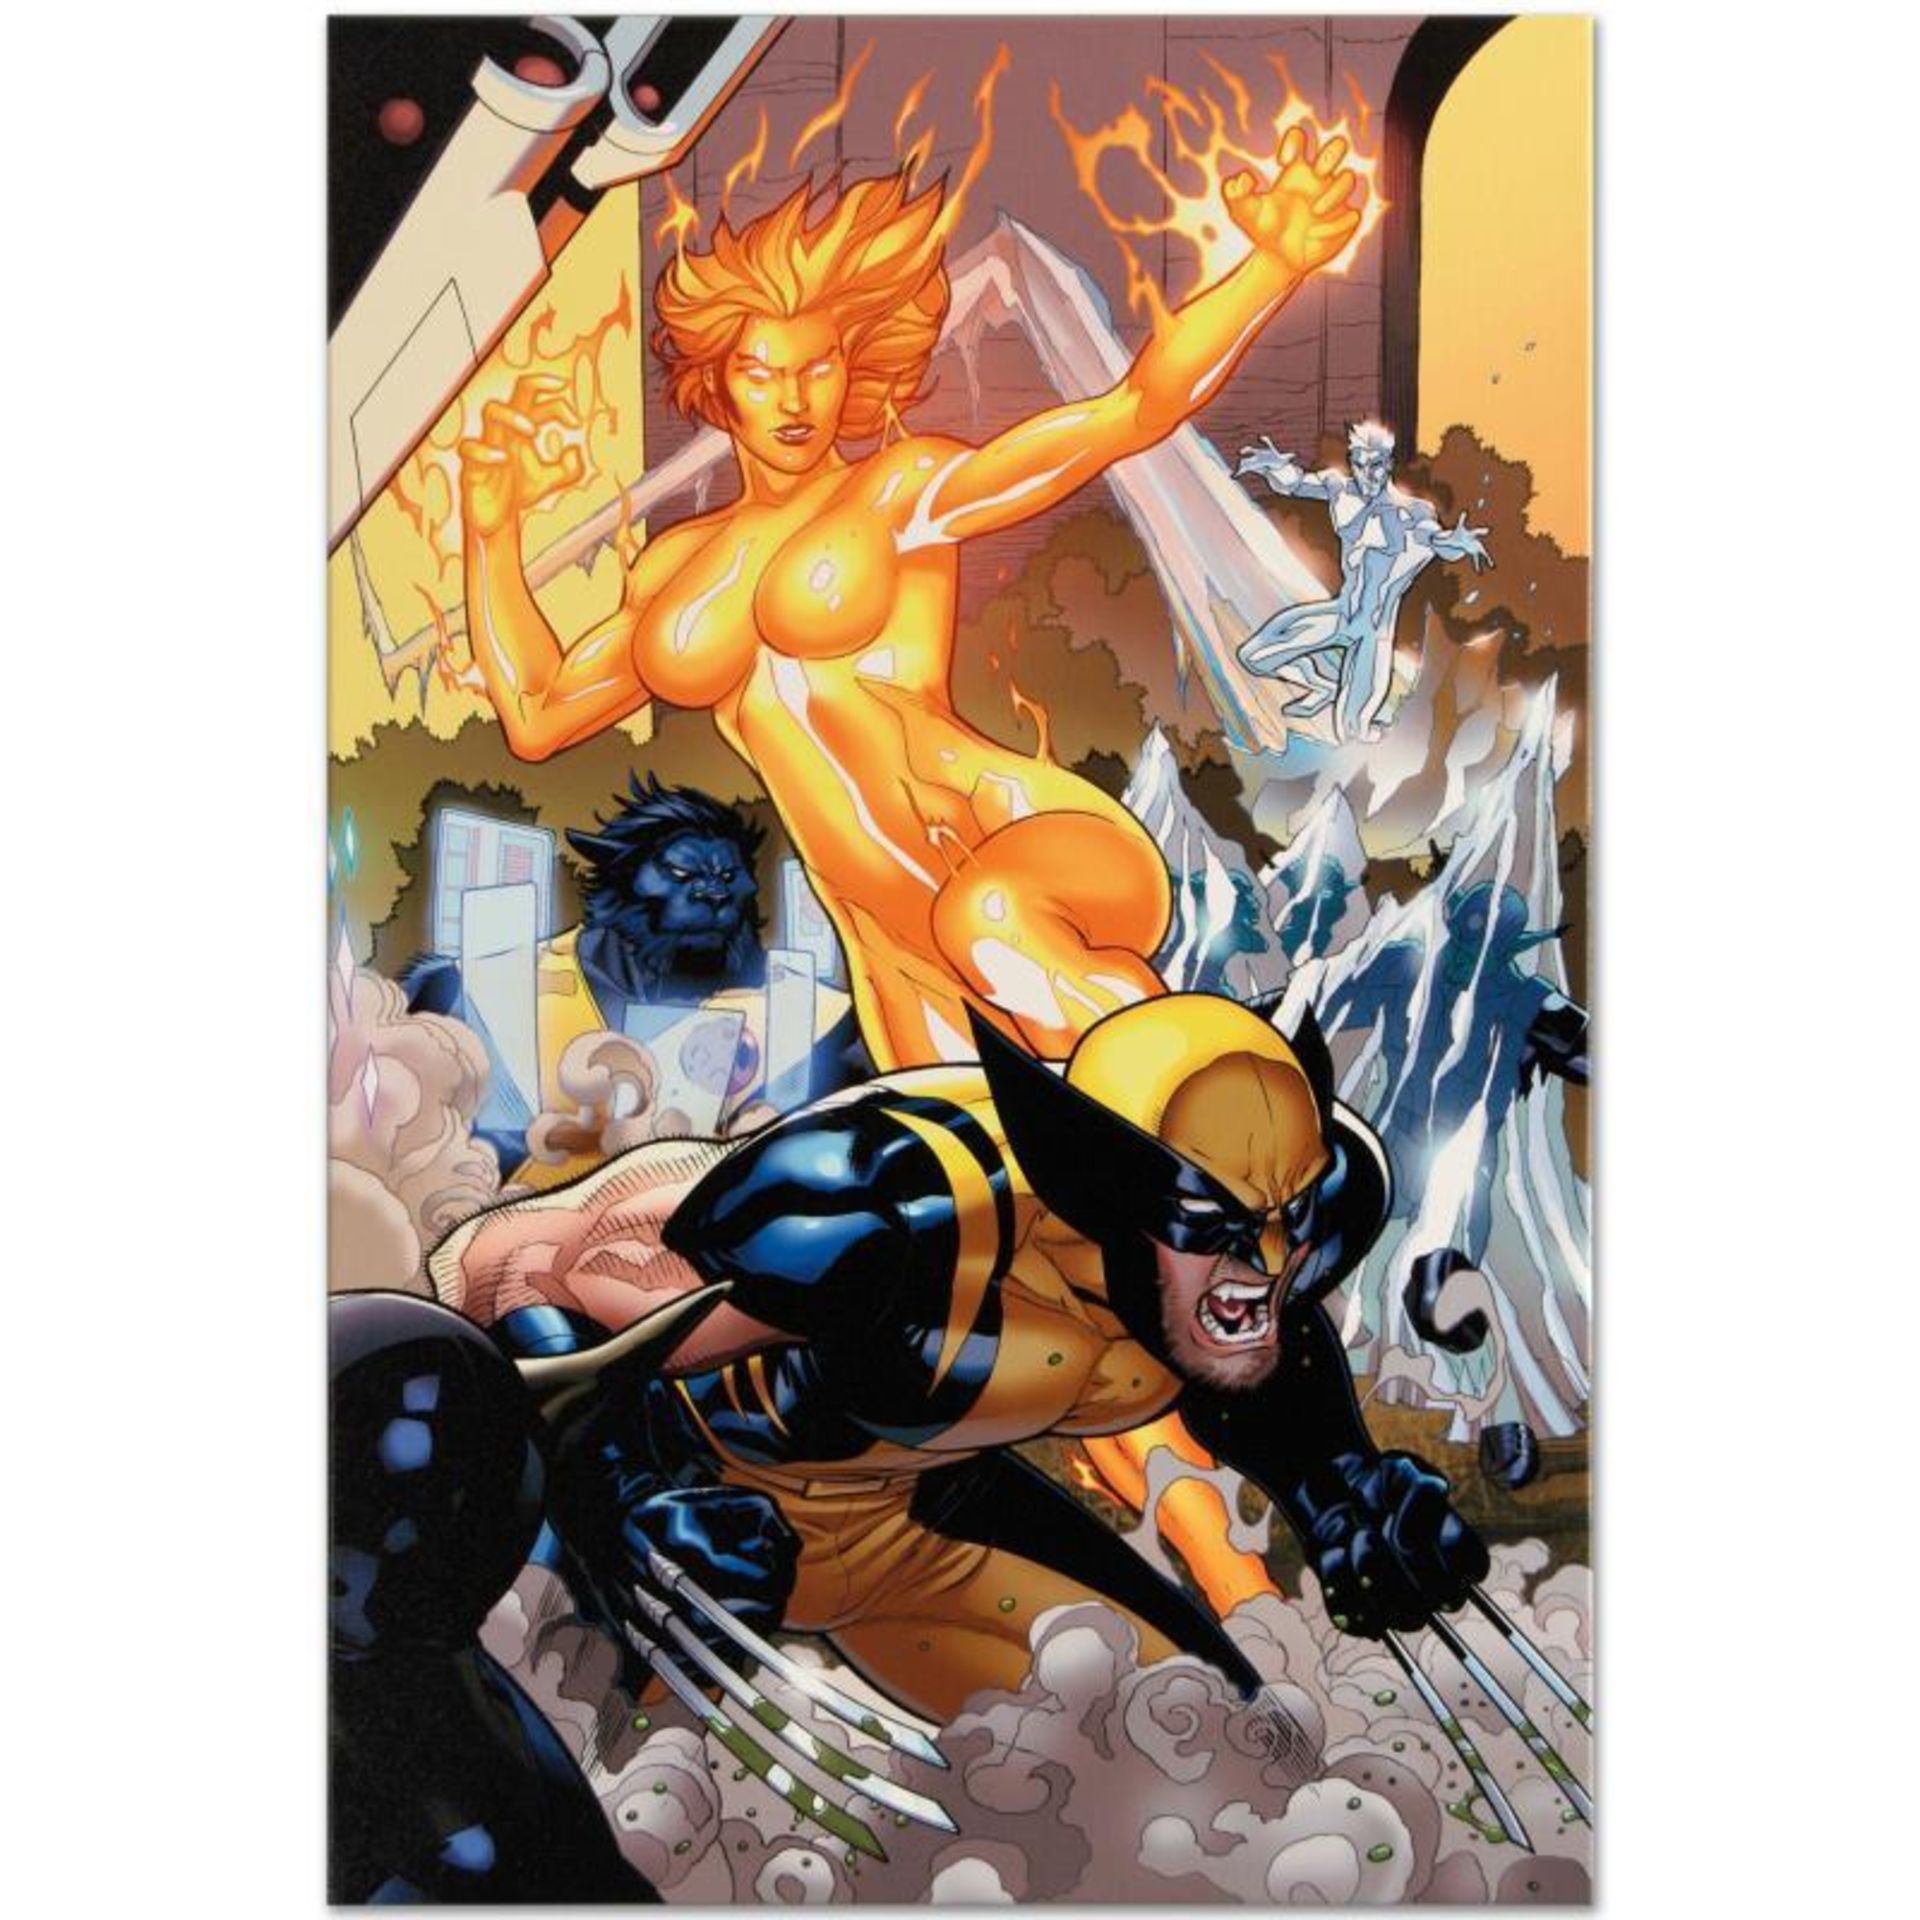 Marvel Comics "Secret Invasion: X-Men #4" Numbered Limited Edition Giclee on Can